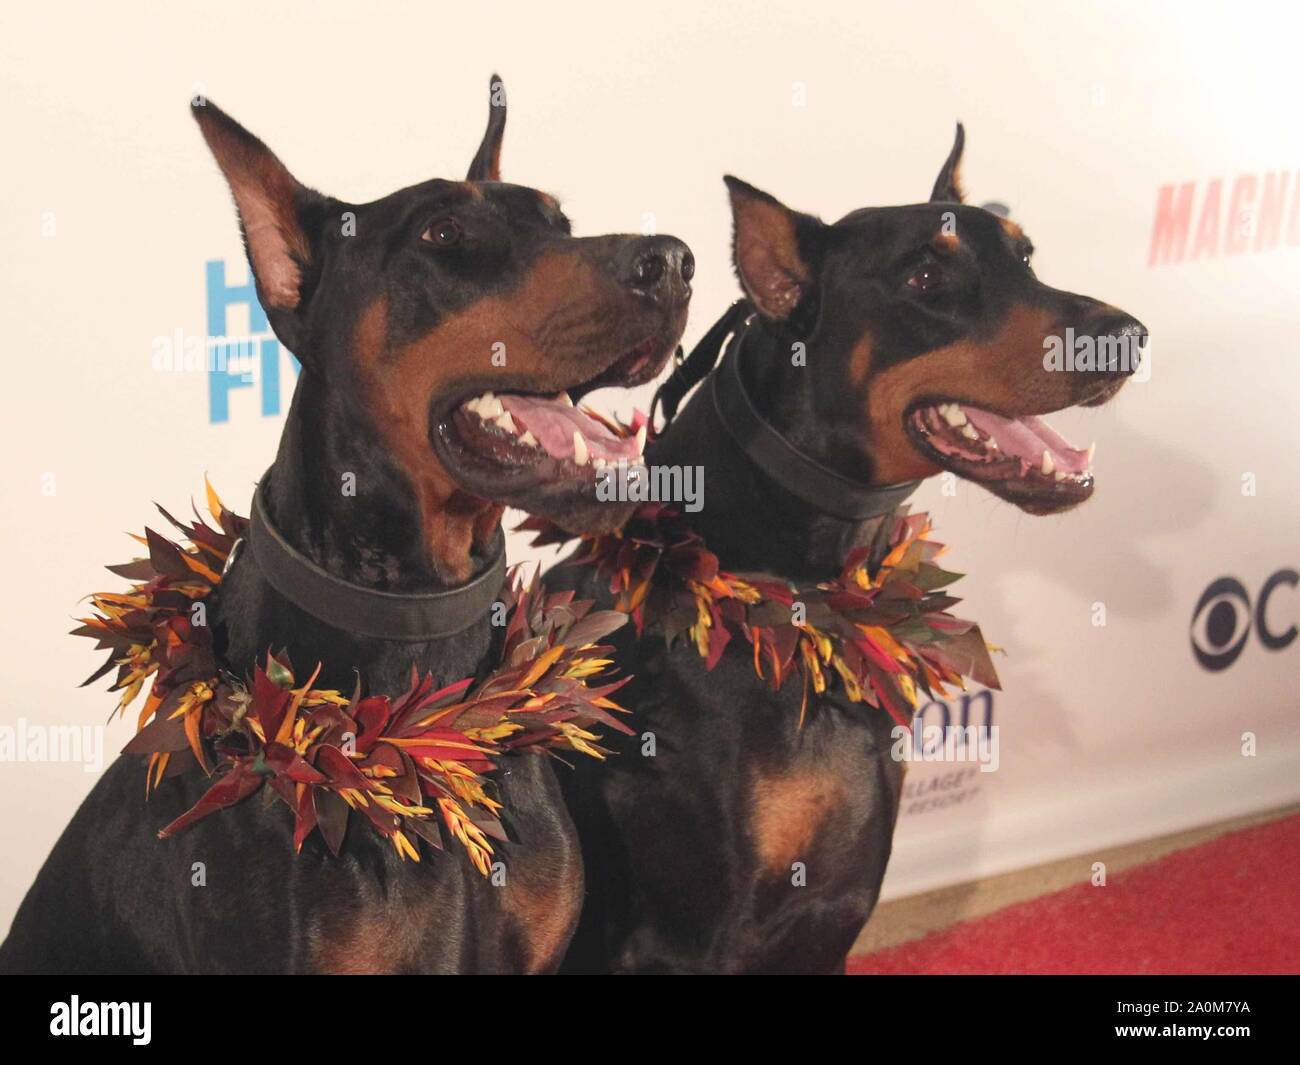 September 19, 2019 - Zeus and Apollo during the Hawaii Five-O and Magnum  P.I. Sunset On The Beach event on Waikiki Beach in Honolulu, Hawaii -  Michael Sullivan/CSM Stock Photo - Alamy